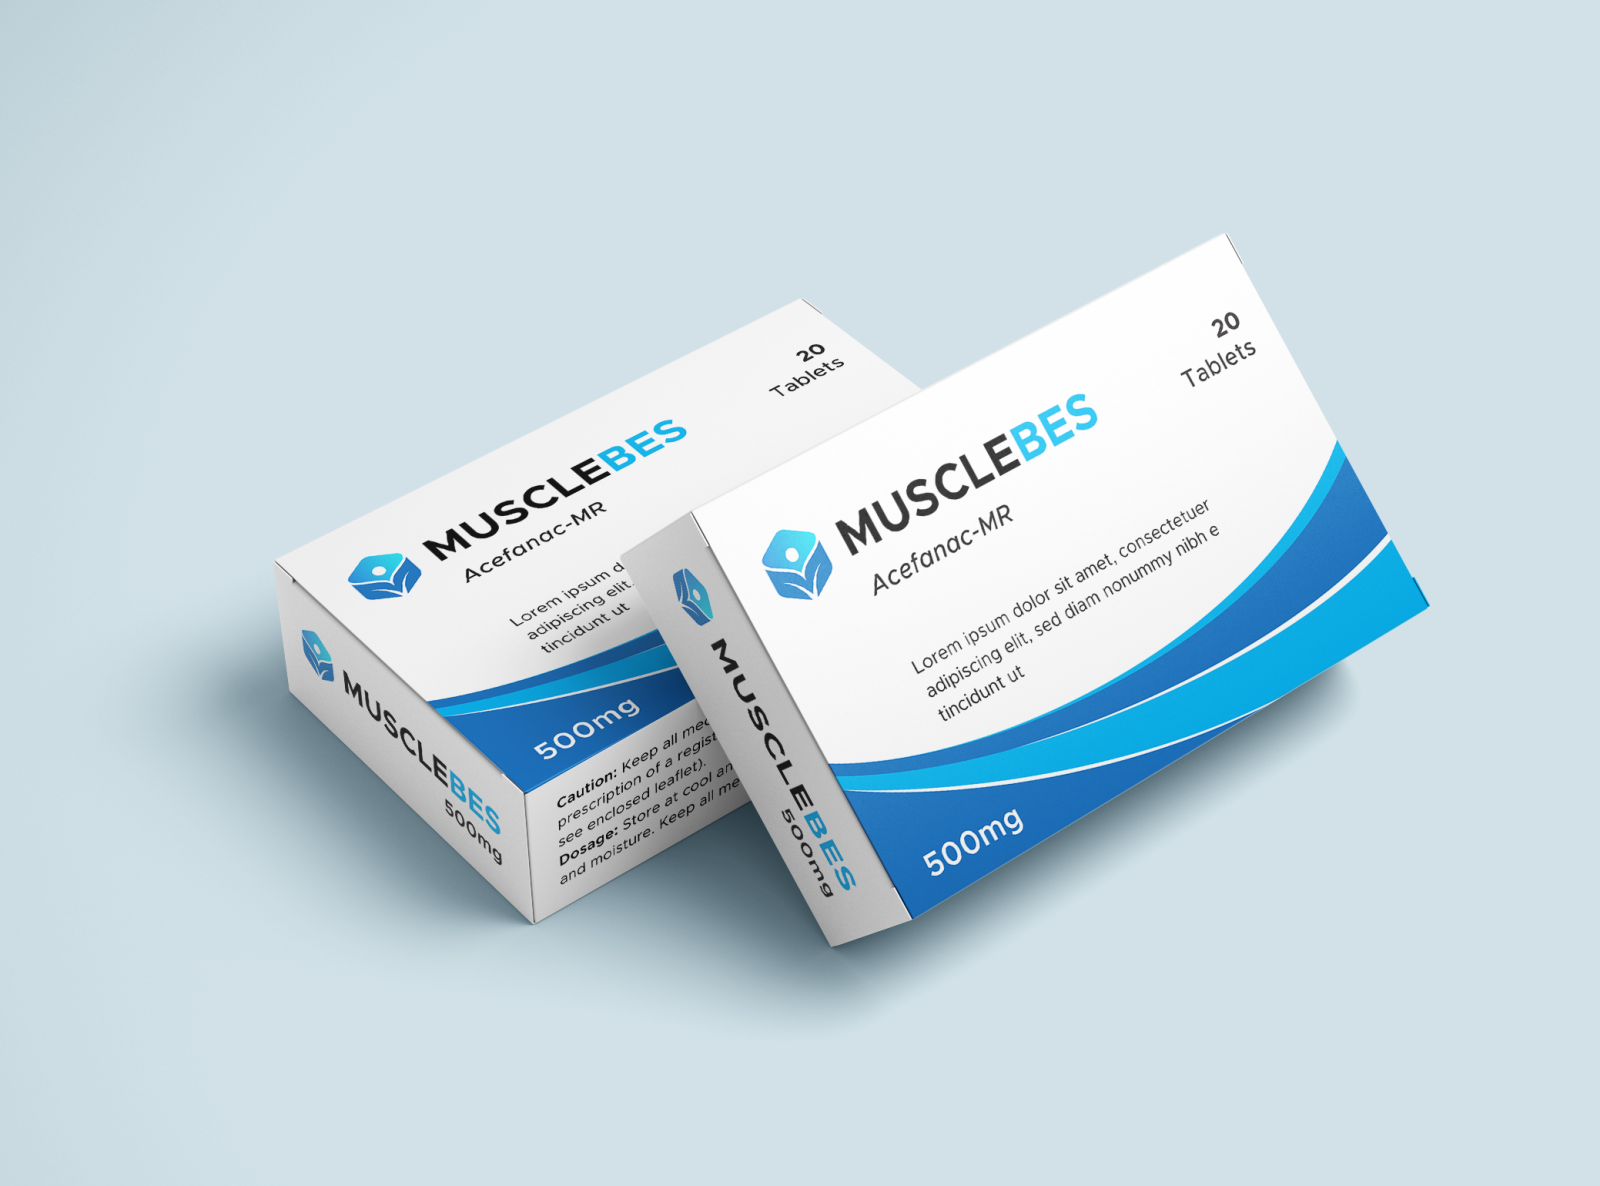 Medicine Box Packaging Design by Designs_Media on Dribbble